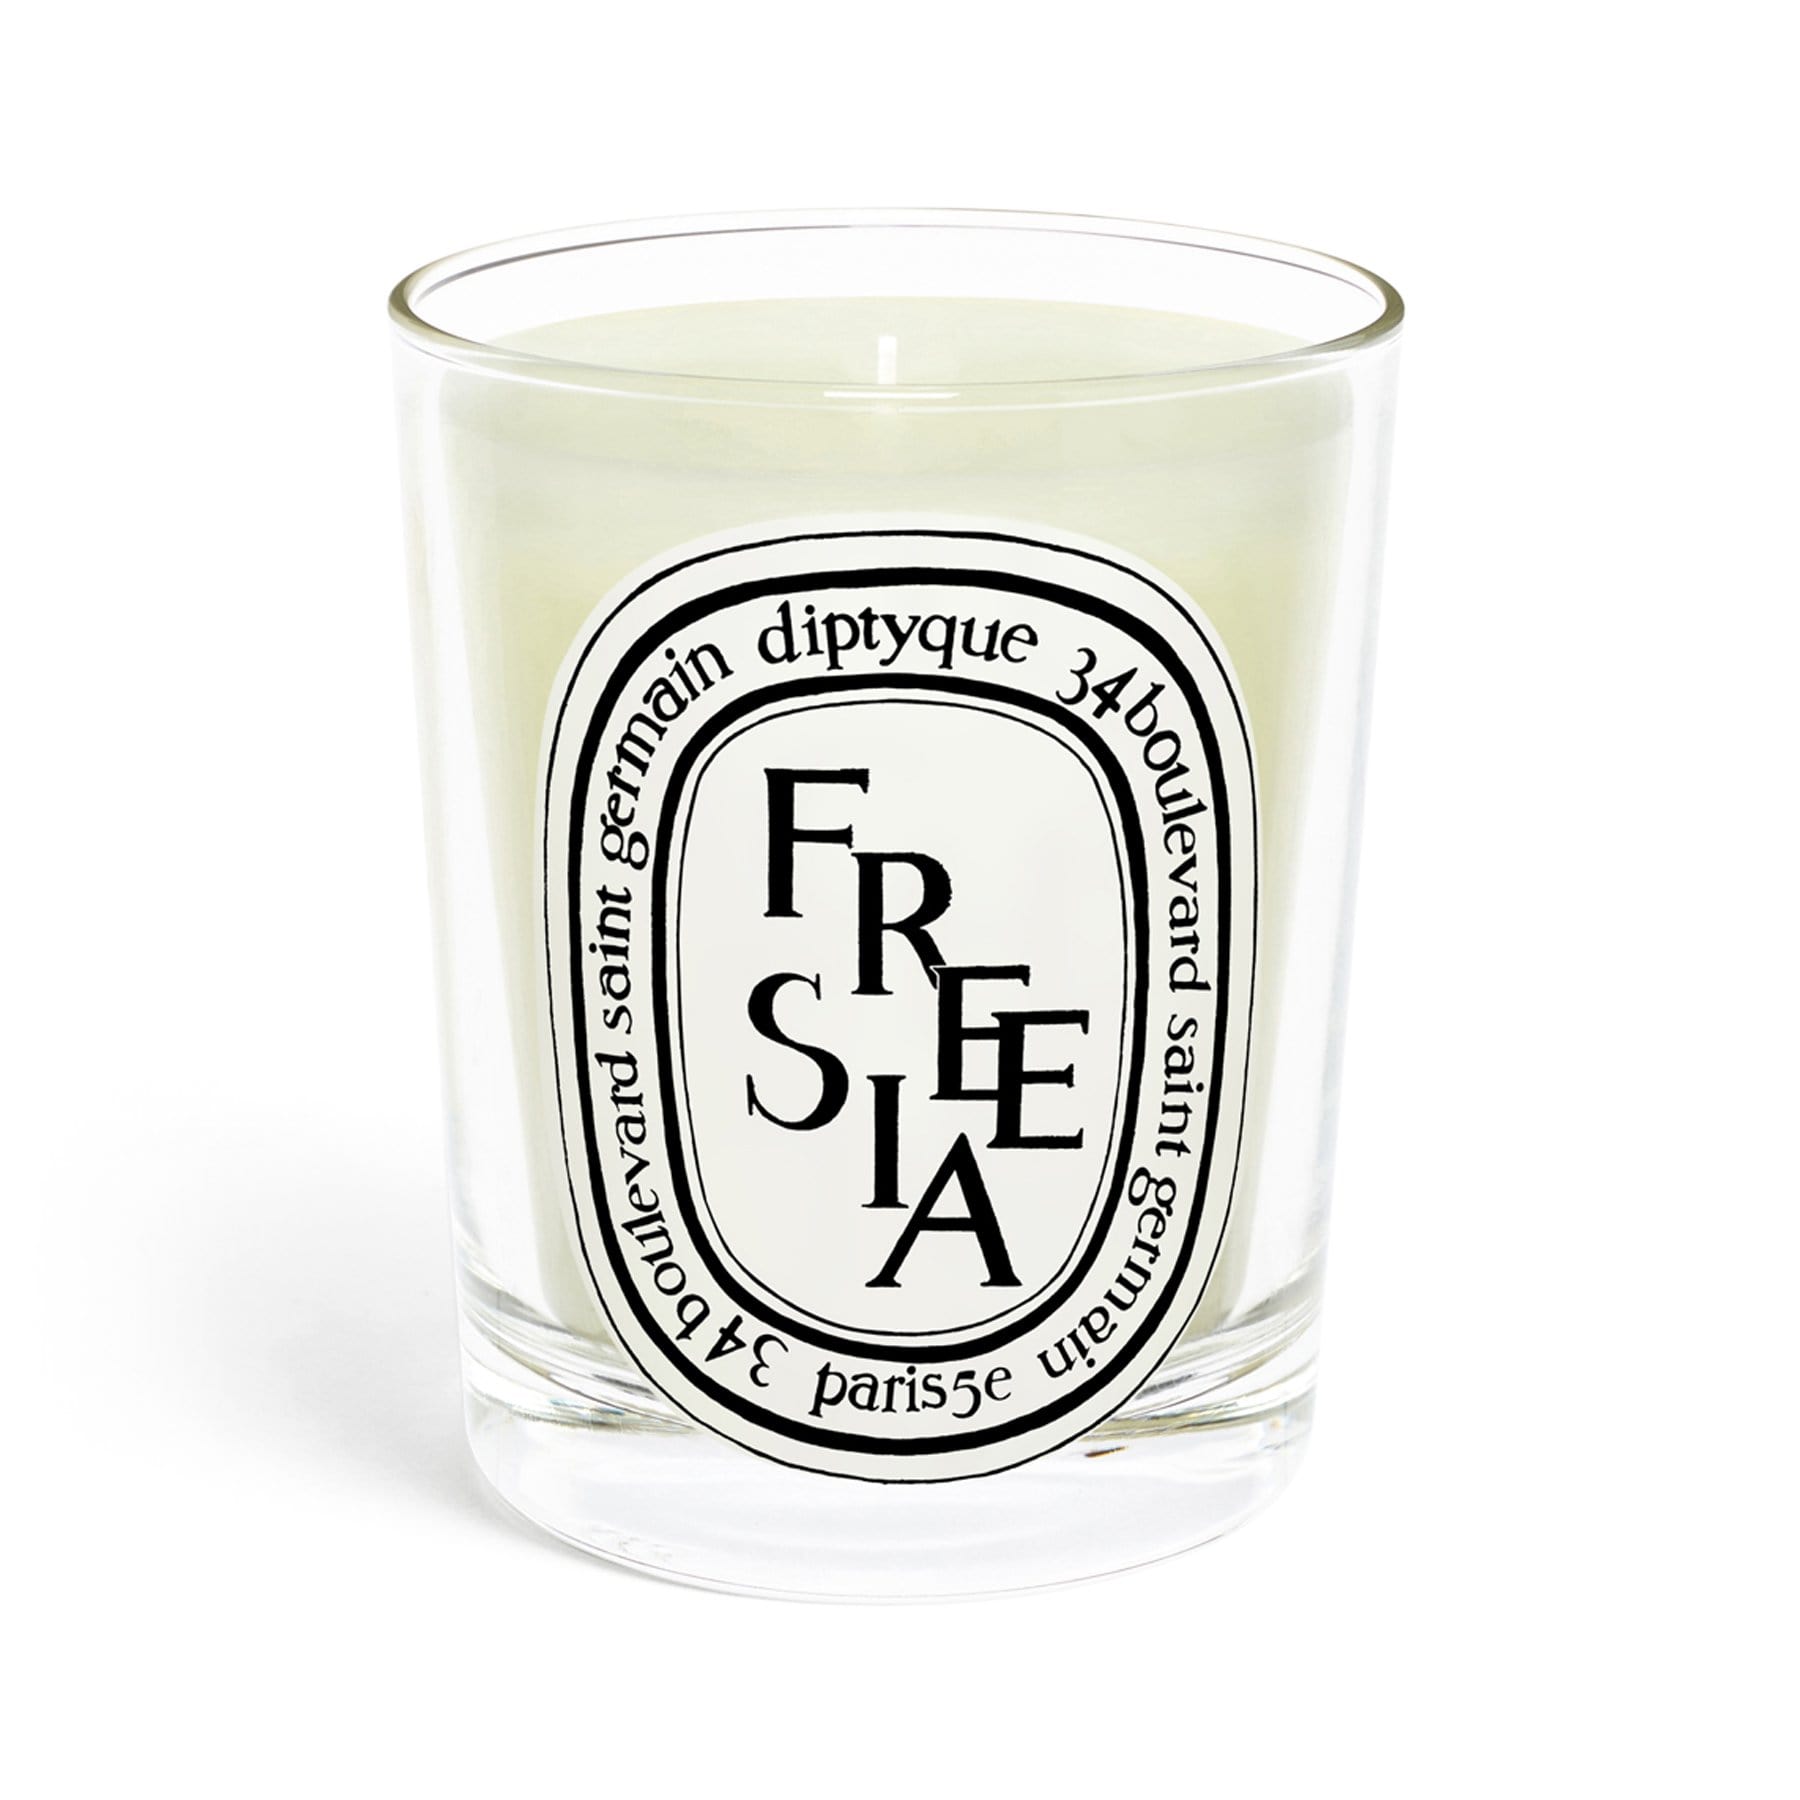 Freesia Diptyque Scented Candle